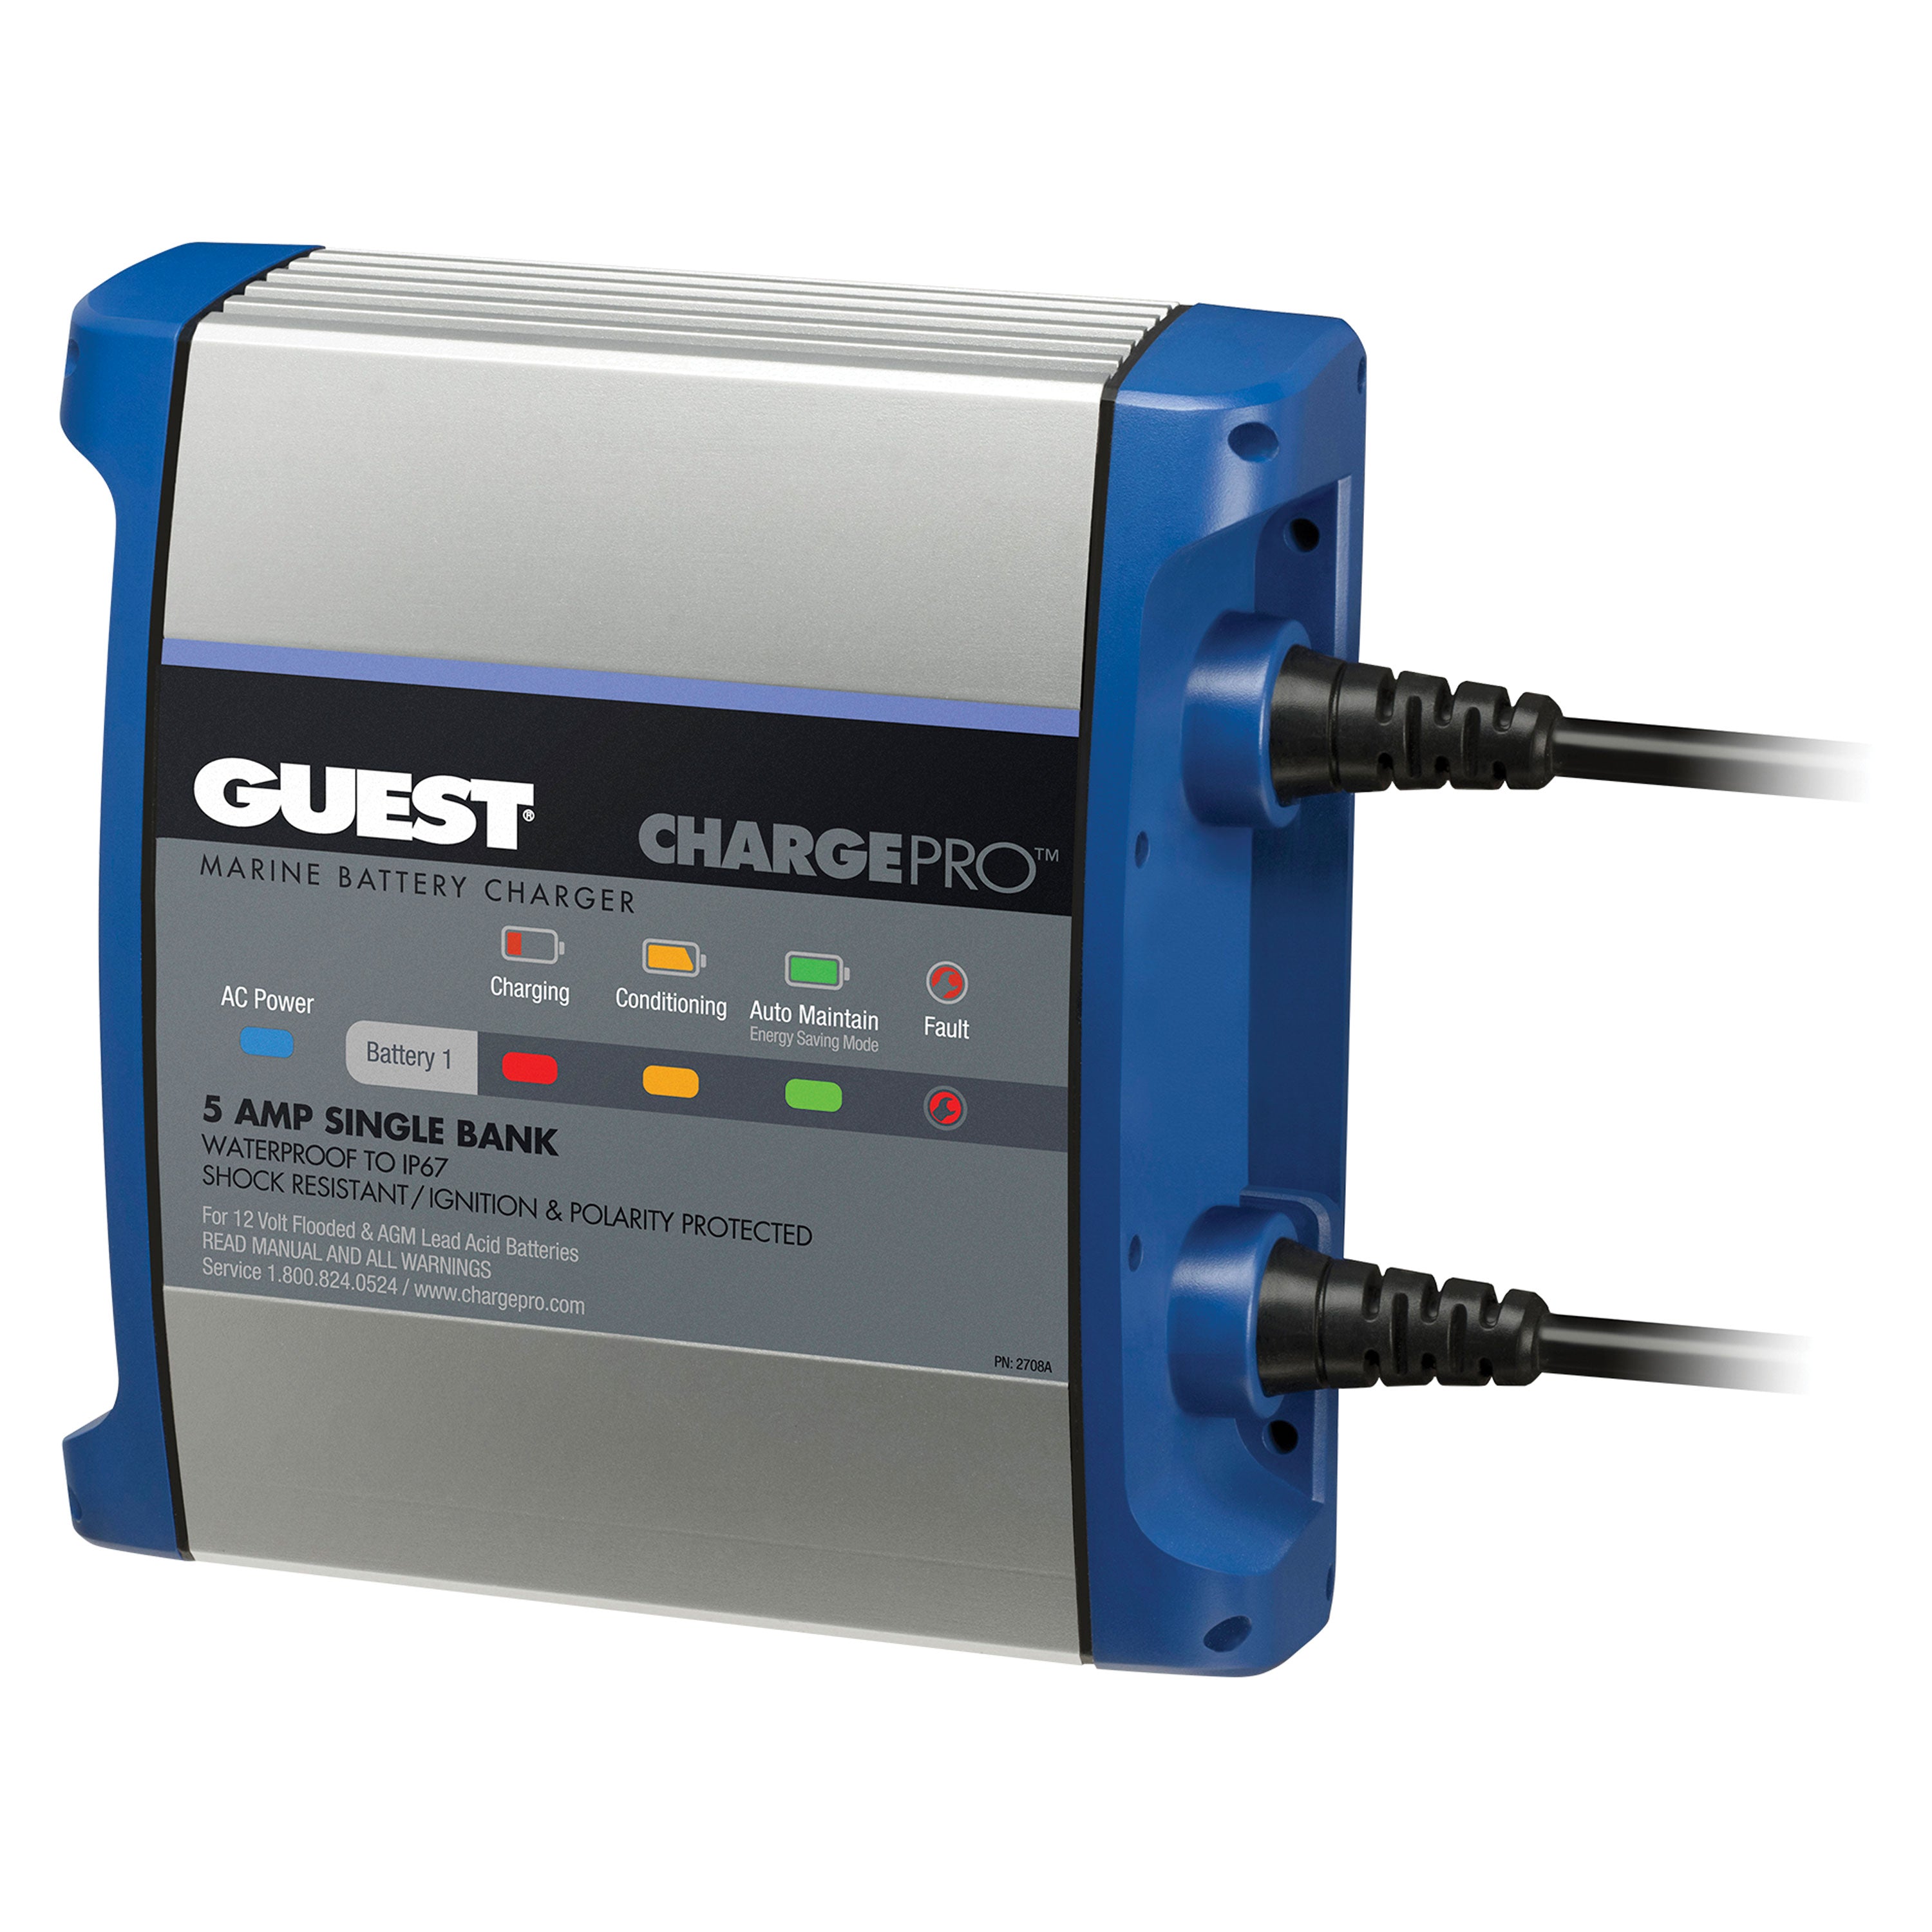 Guest 2708A ChargePro On-Board Battery Charger - 5A/12V, 1 Bank, 120V Input